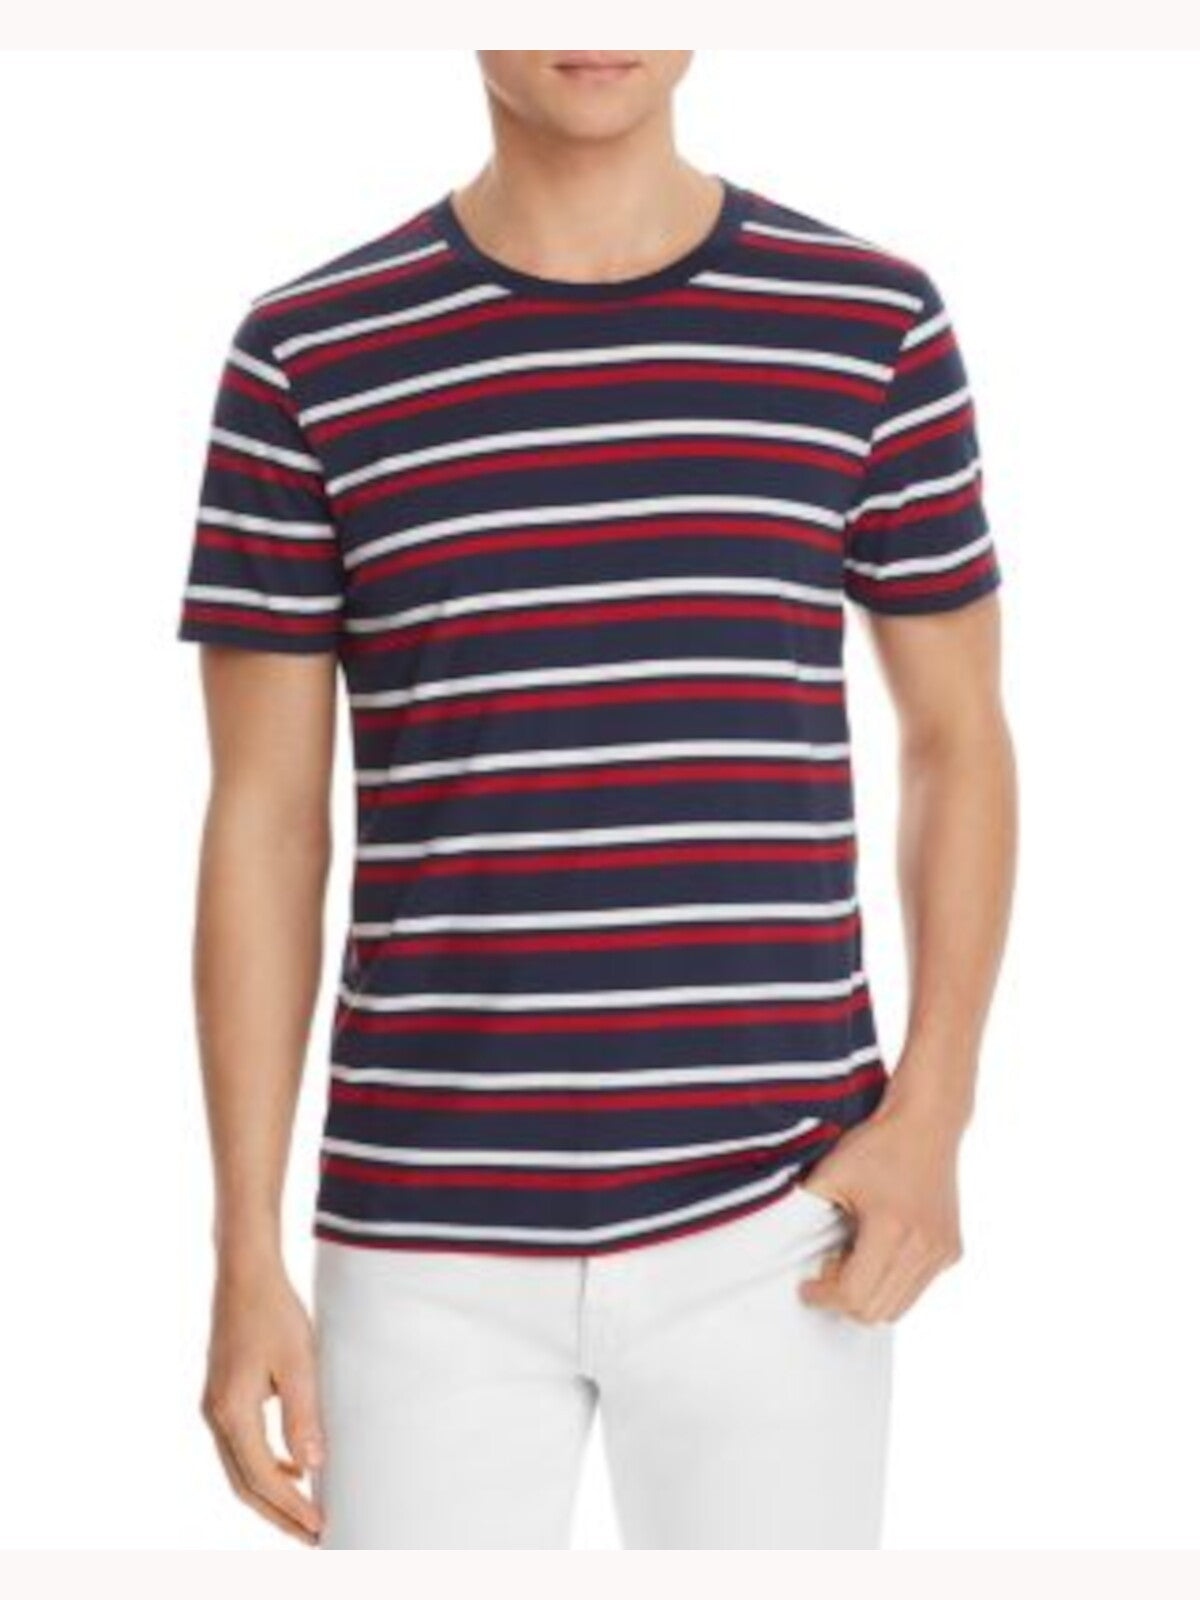 Pacific and Park Mens Navy Striped T-Shirt L